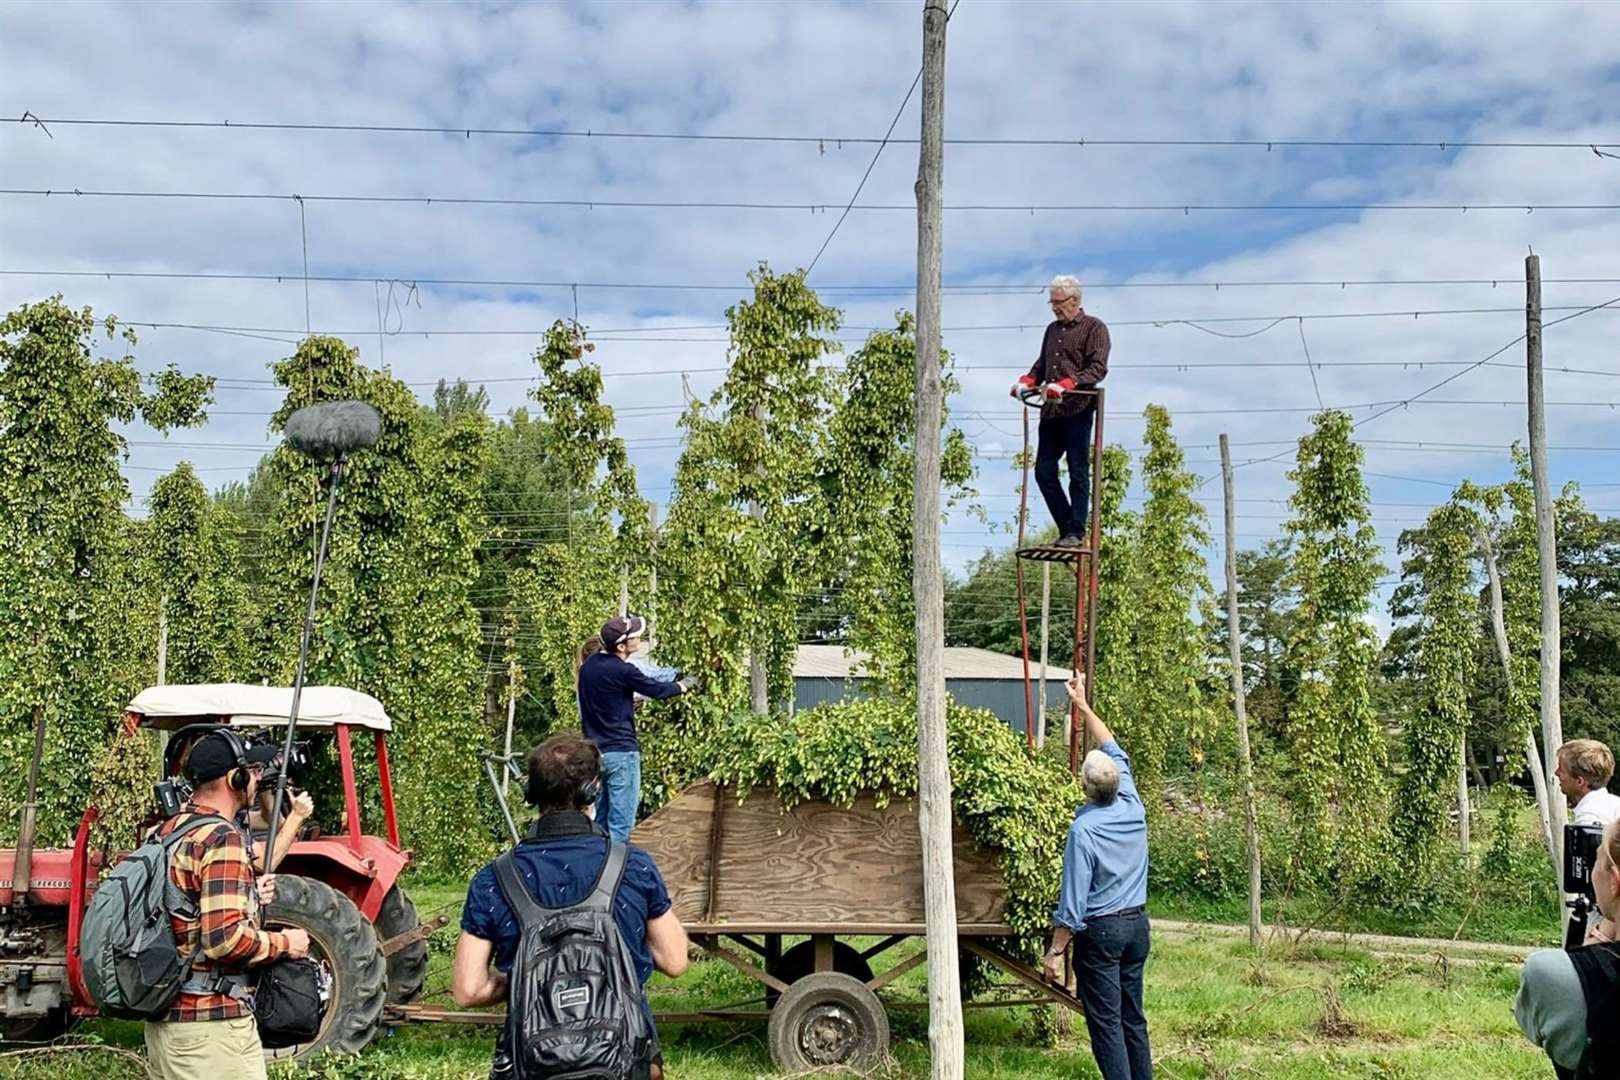 The veteren star was pulled along on a ladder to pick the hops. Photo: Castle Farm